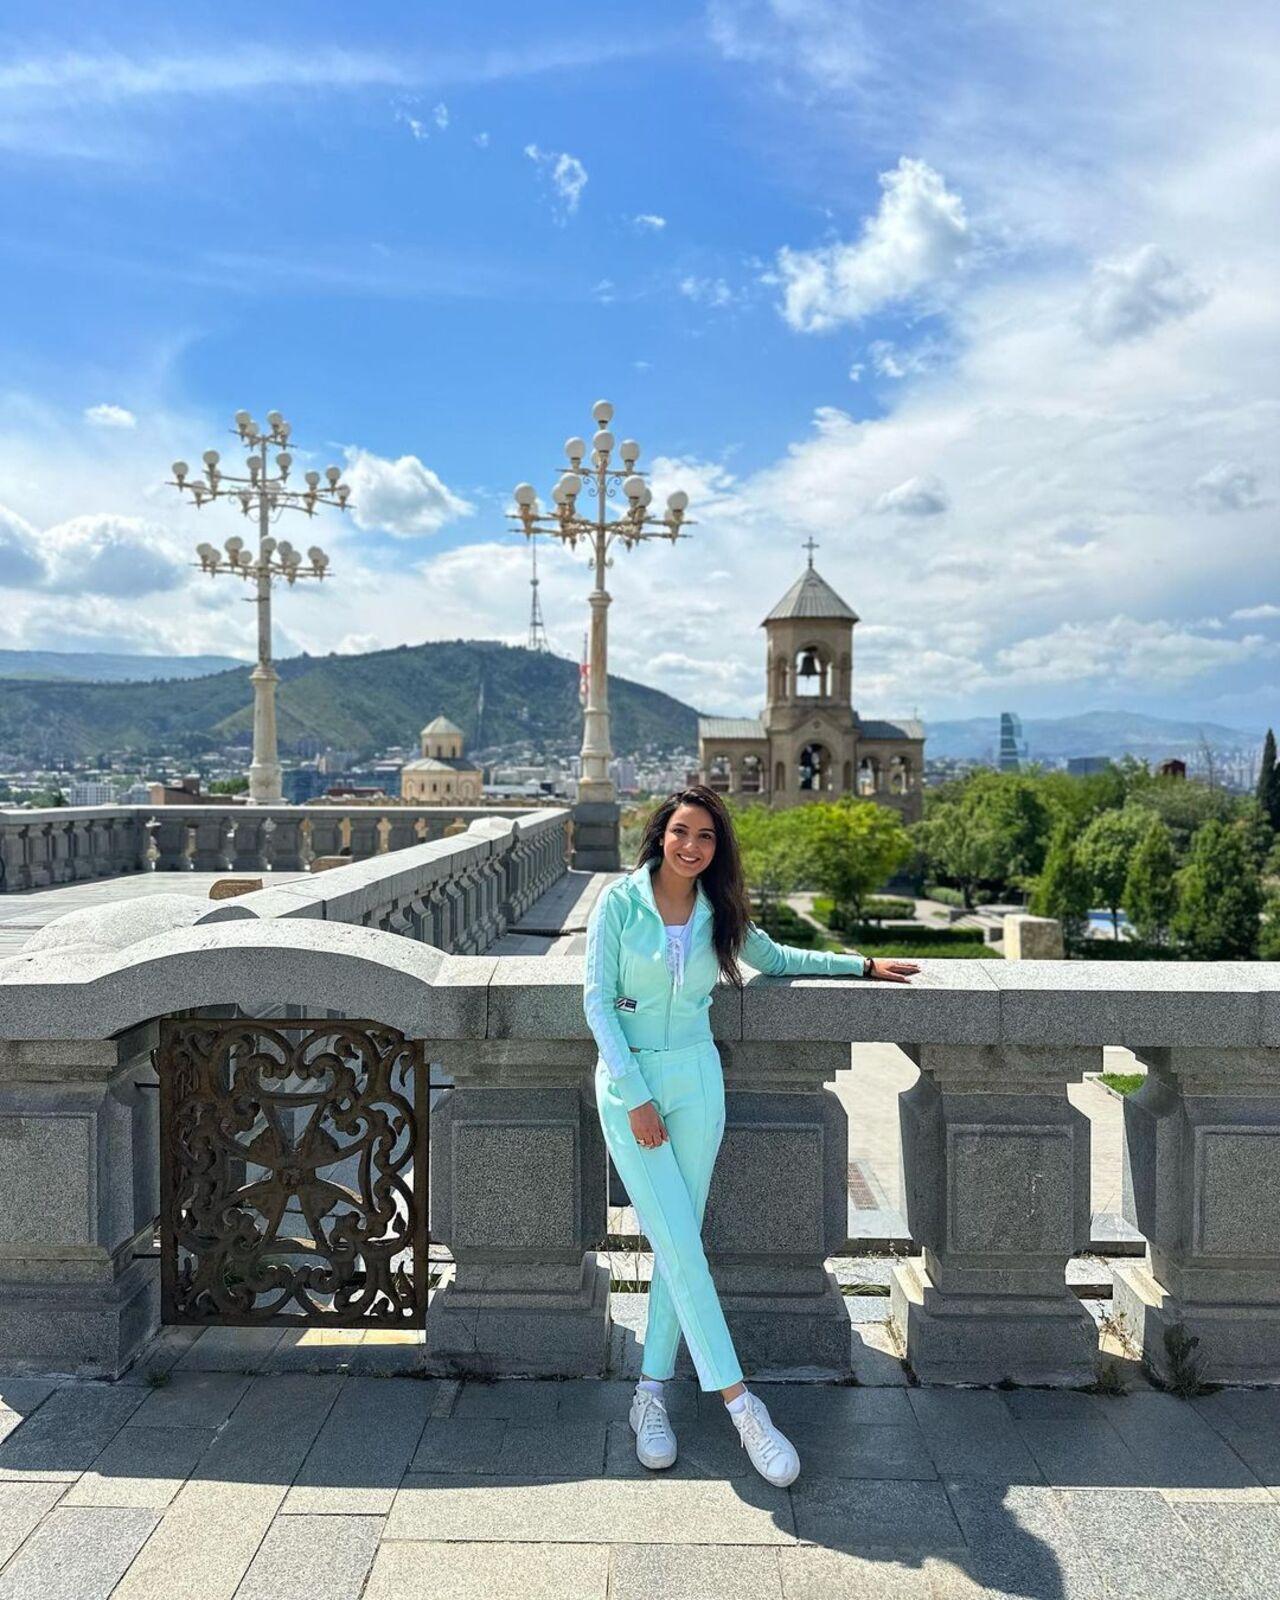 Jasmine chose a stylish blue tracksuit for her vacation in Tbilisi, allowing her hair to flow freely as she explored the city